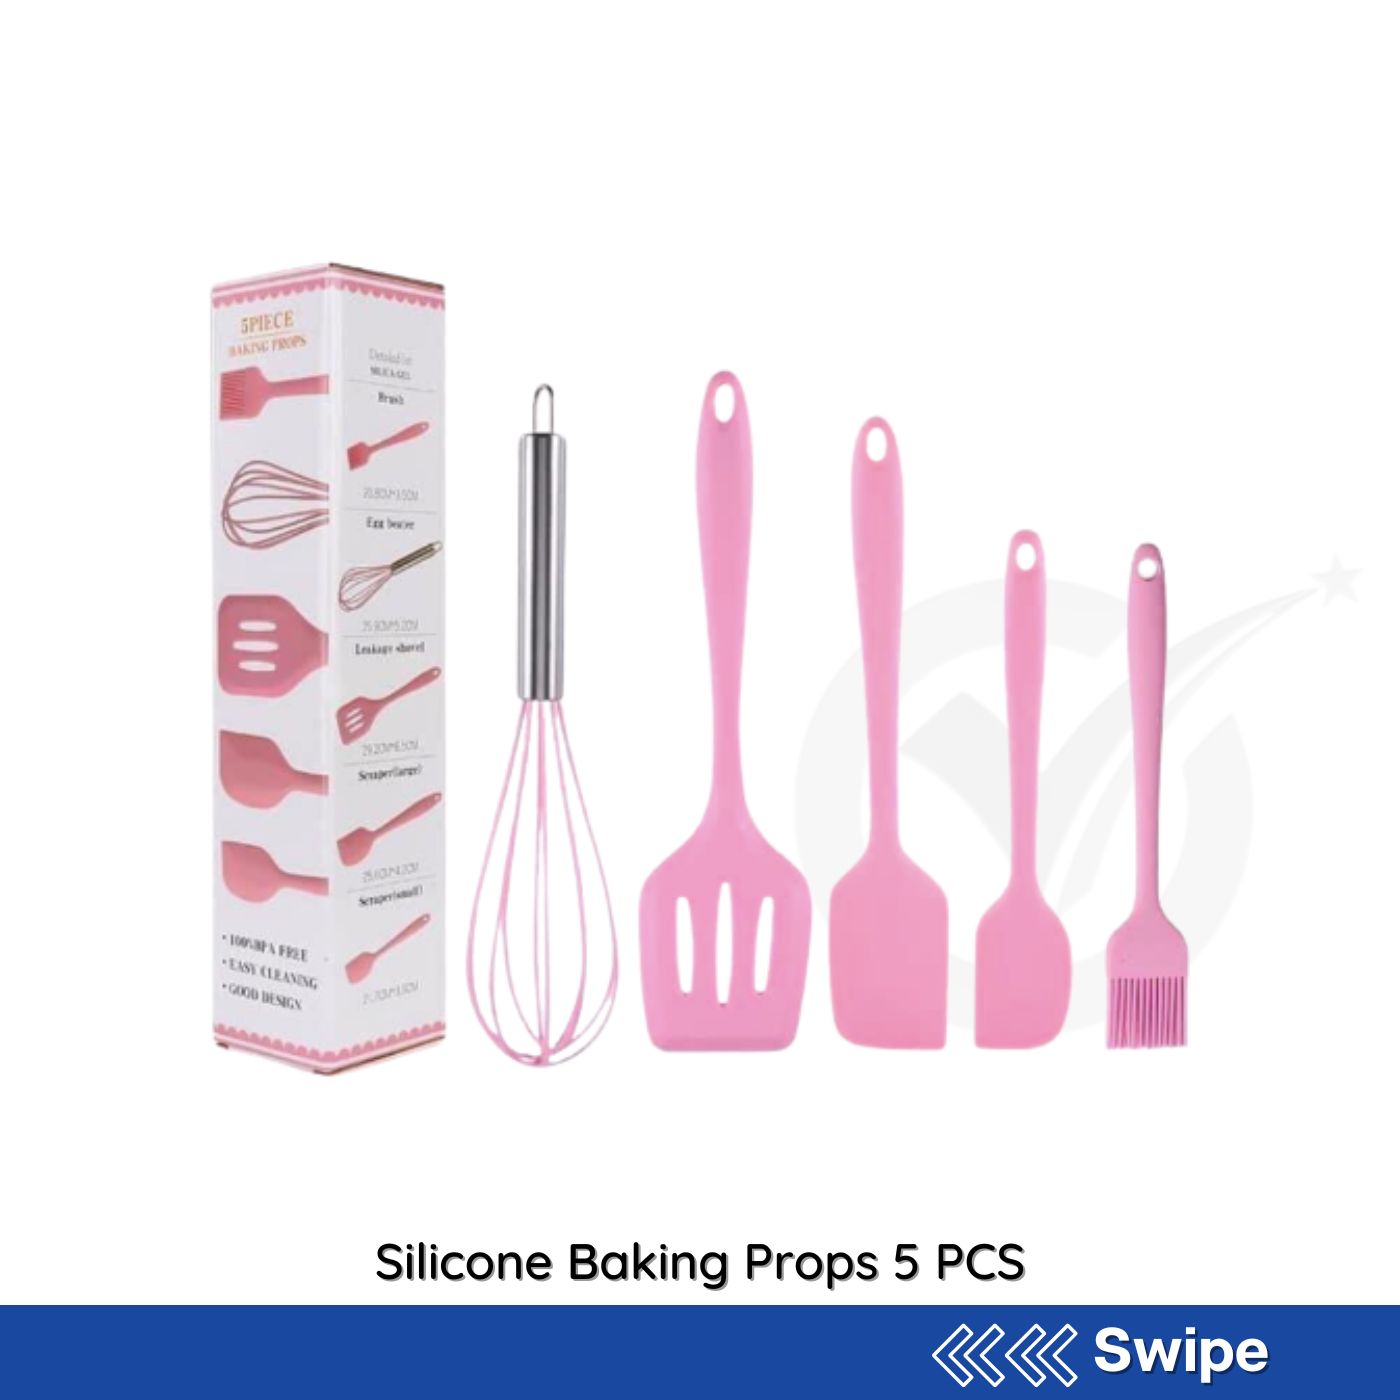 Silicone Baking Props 5 PCS - People's Choice Marketing